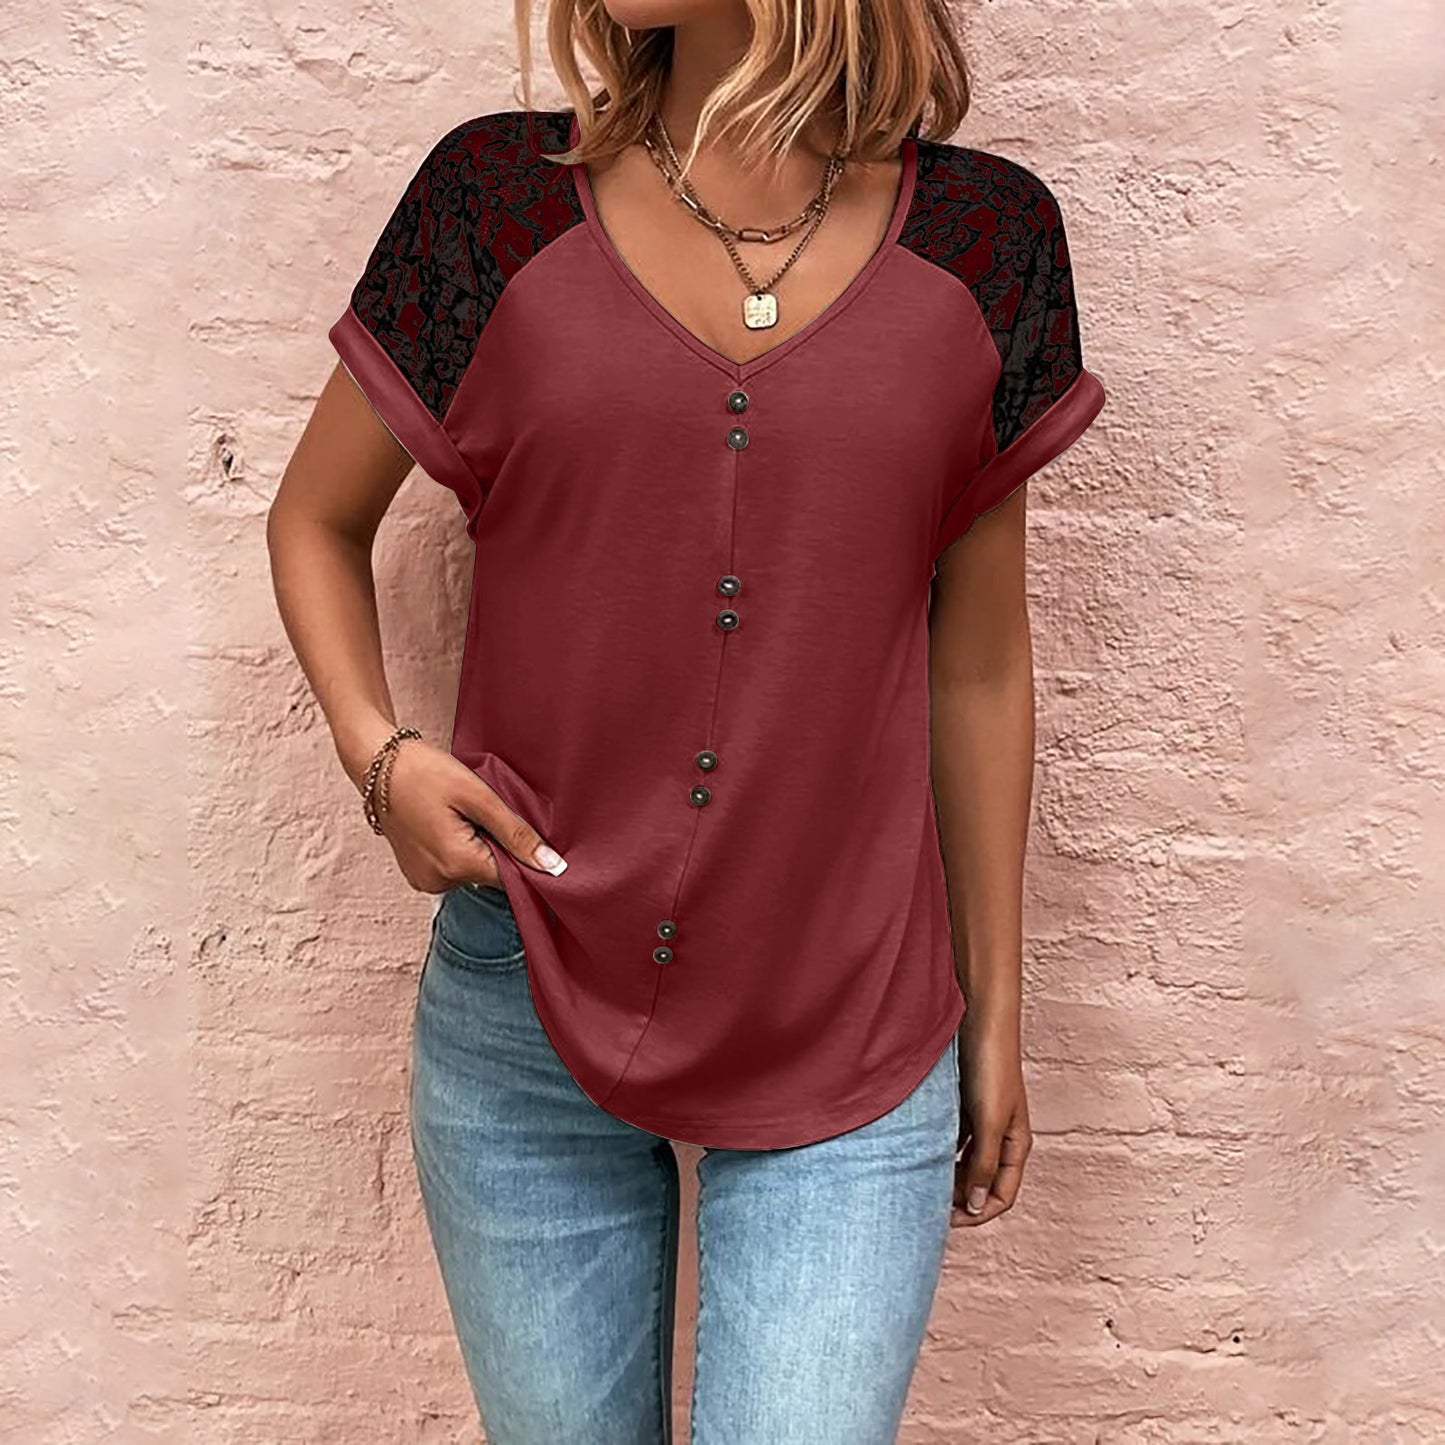 Women's T-Shirt Lace Stitching V-neck Top With Button Casual Summer Short Sleeve Pullover Shirt